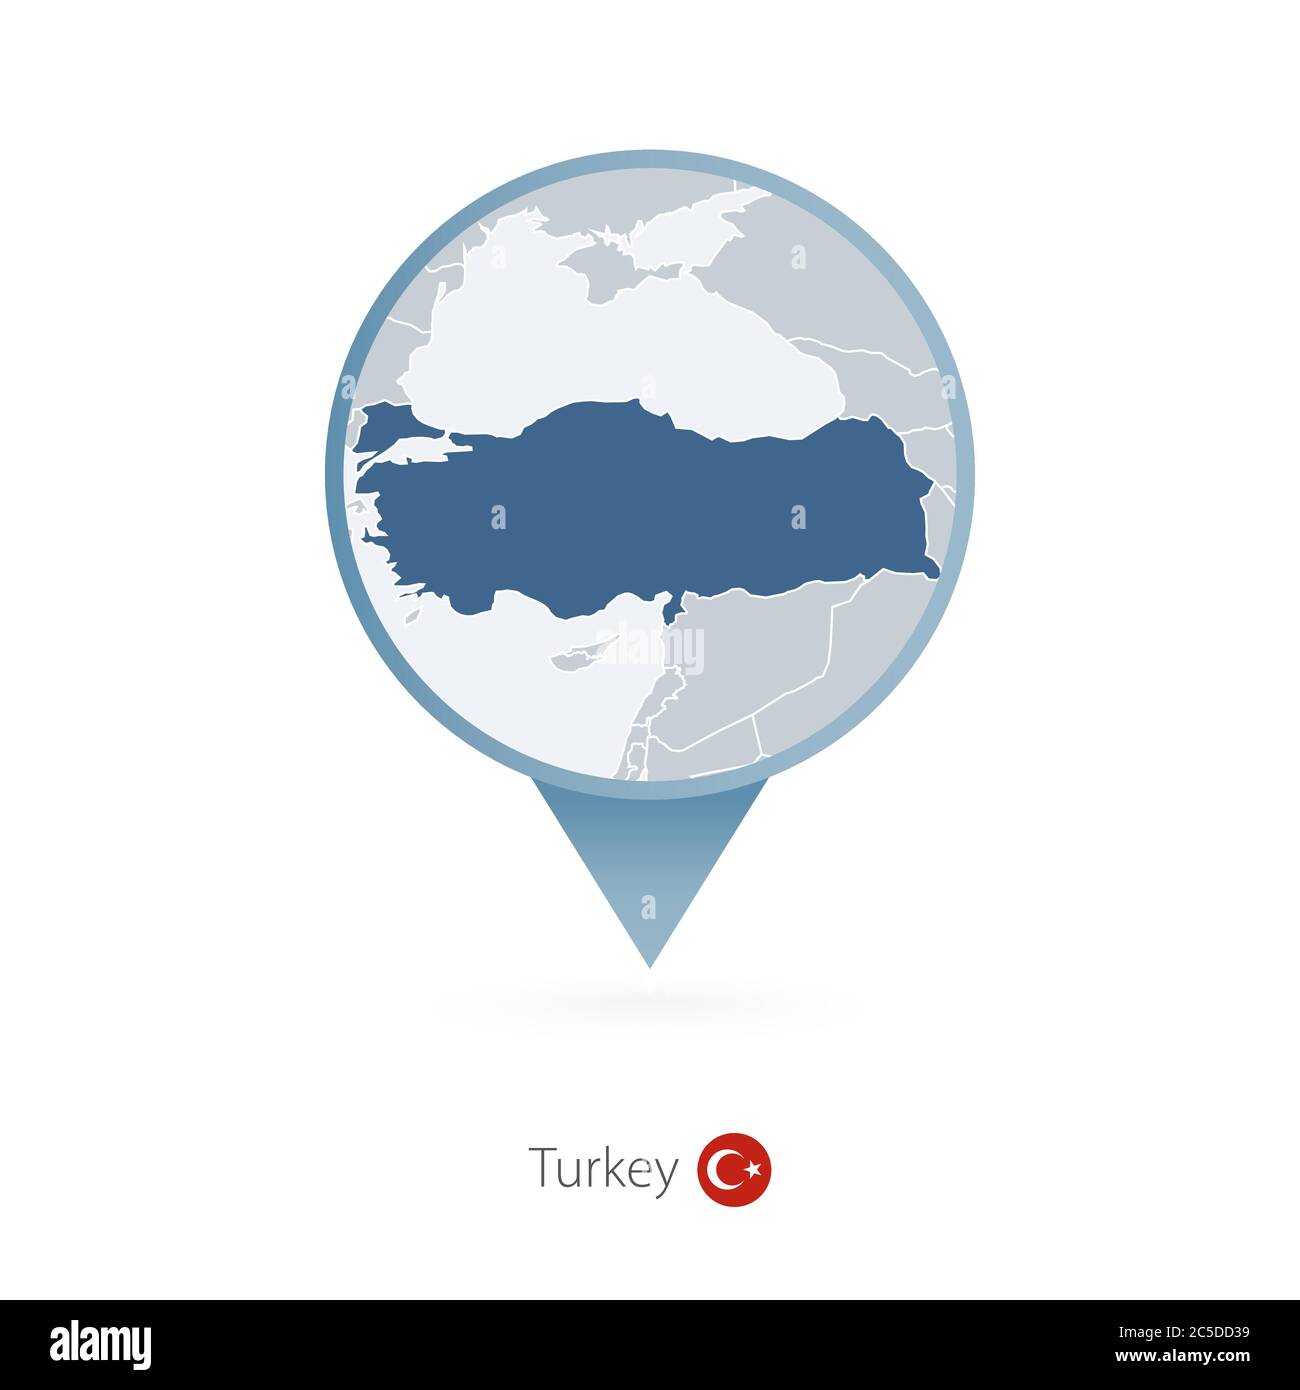 Map pin with detailed map of Turkey and neighboring countries. Stock Vector